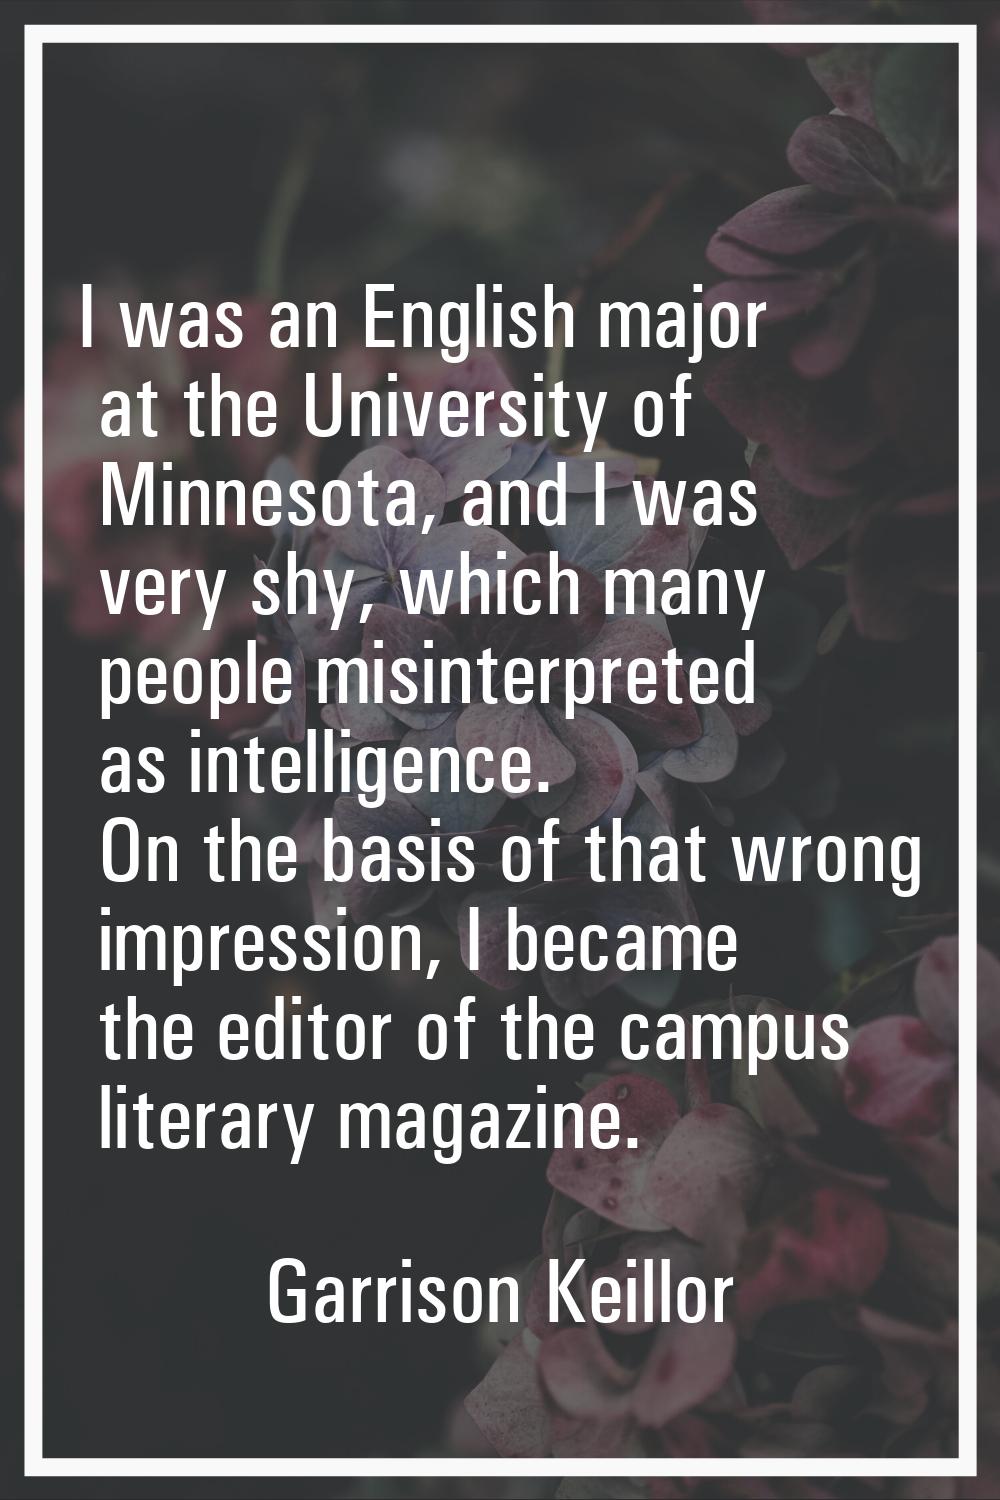 I was an English major at the University of Minnesota, and I was very shy, which many people misint